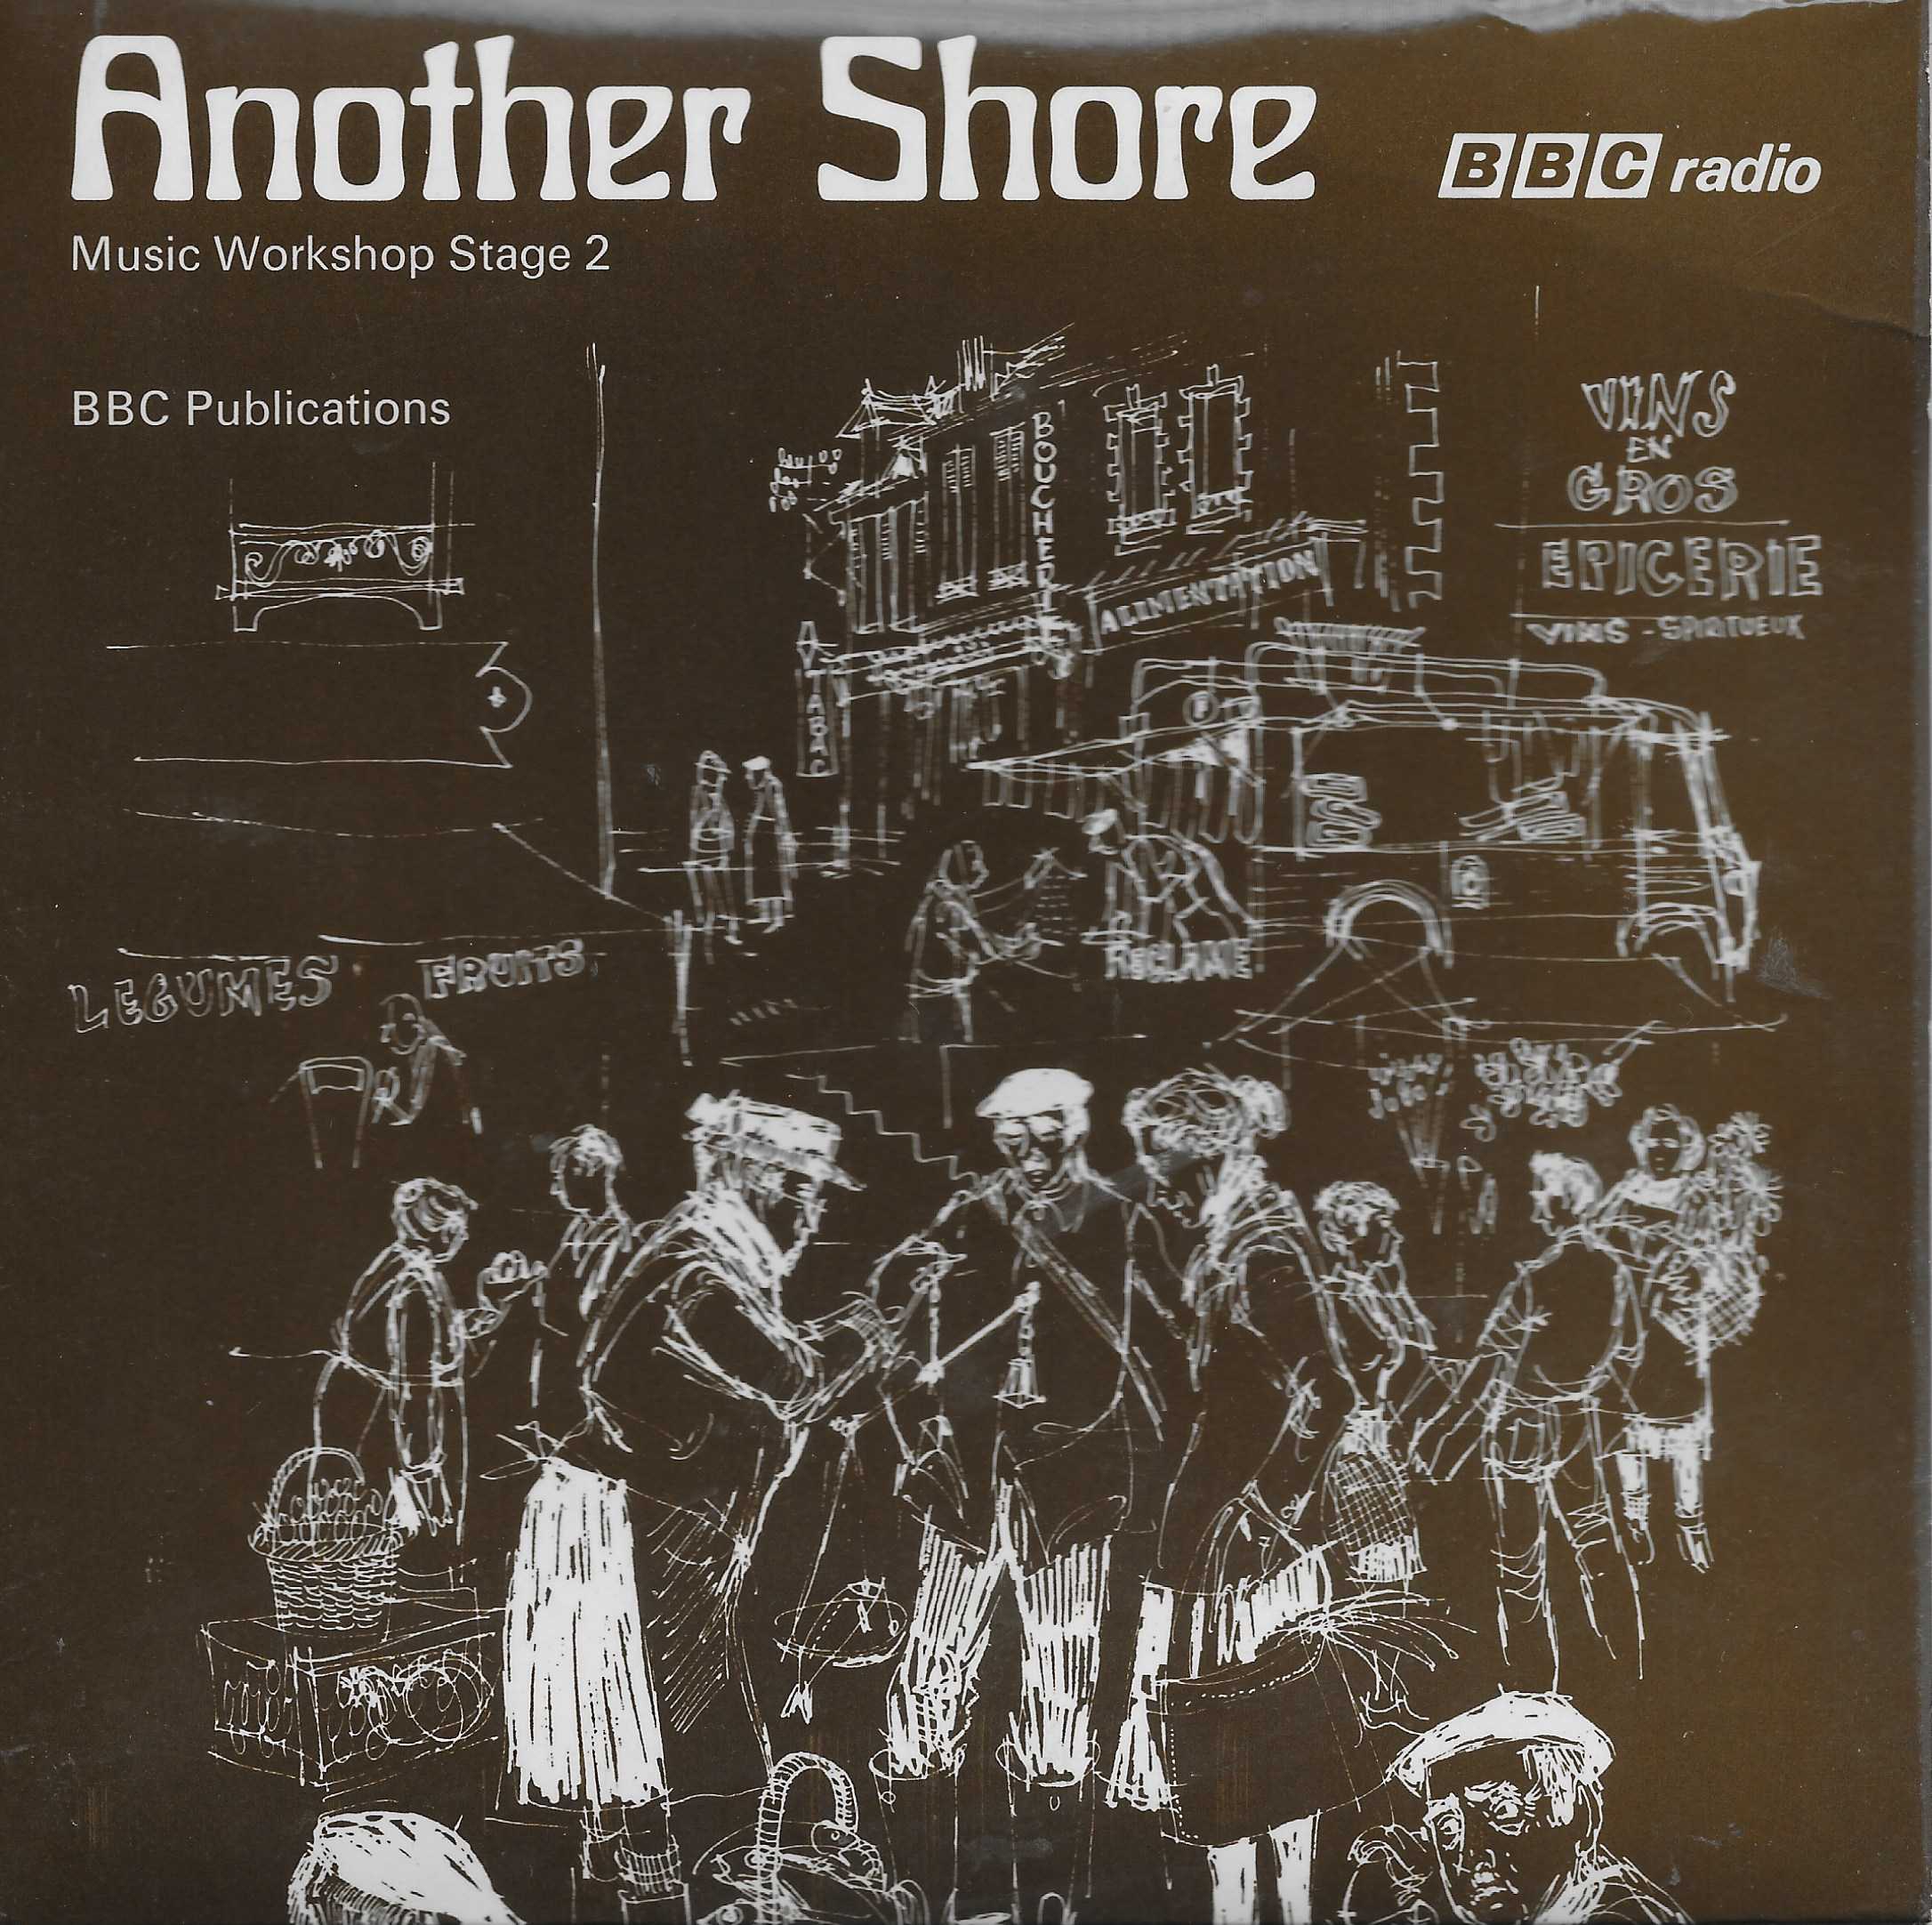 Picture of Another shore by artist Jan Rosol from the BBC singles - Records and Tapes library